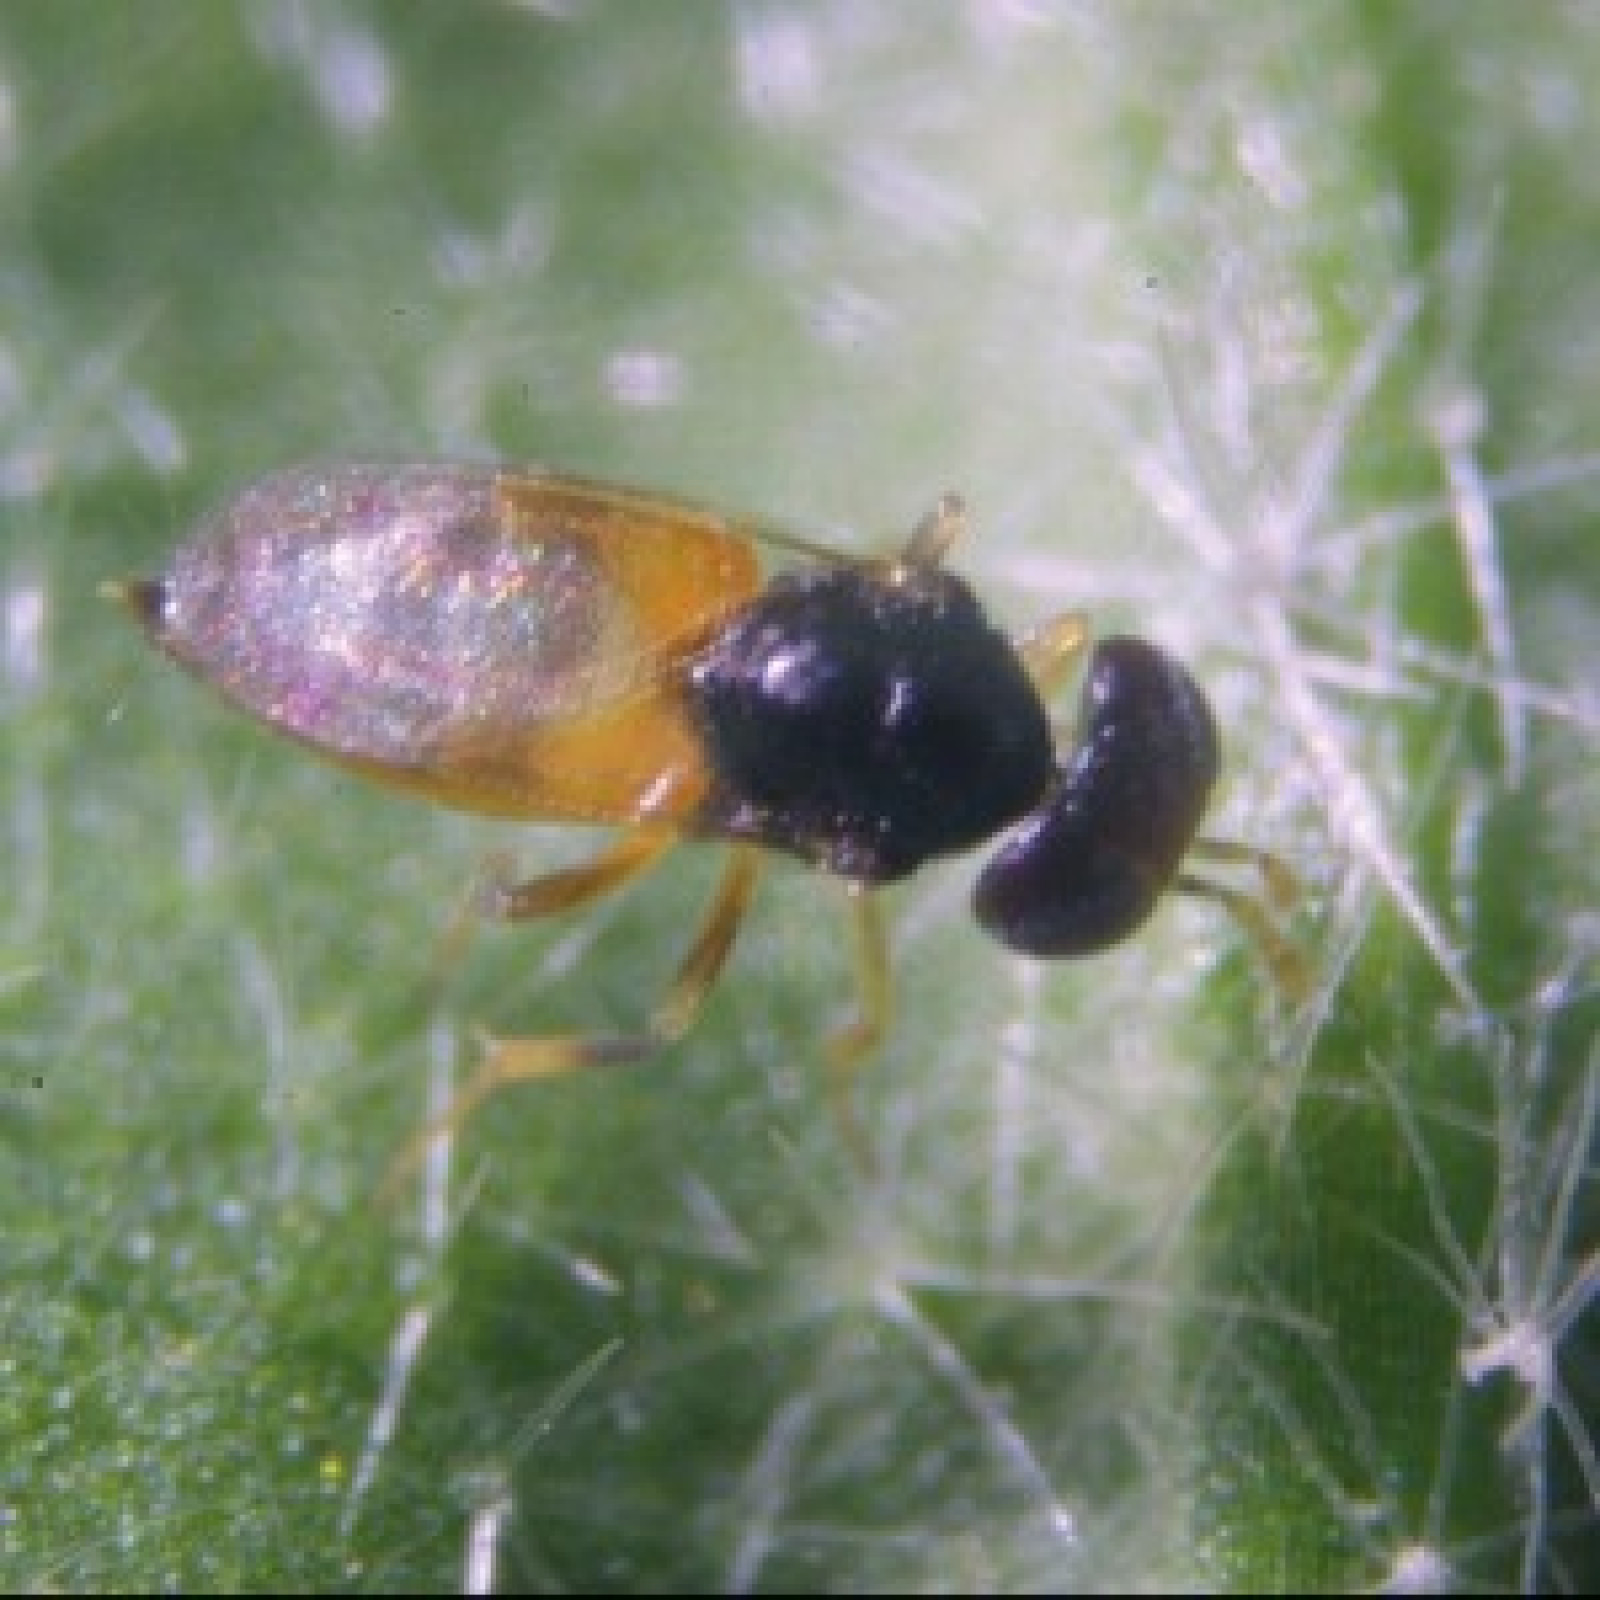 Invicta helps with biological pest control